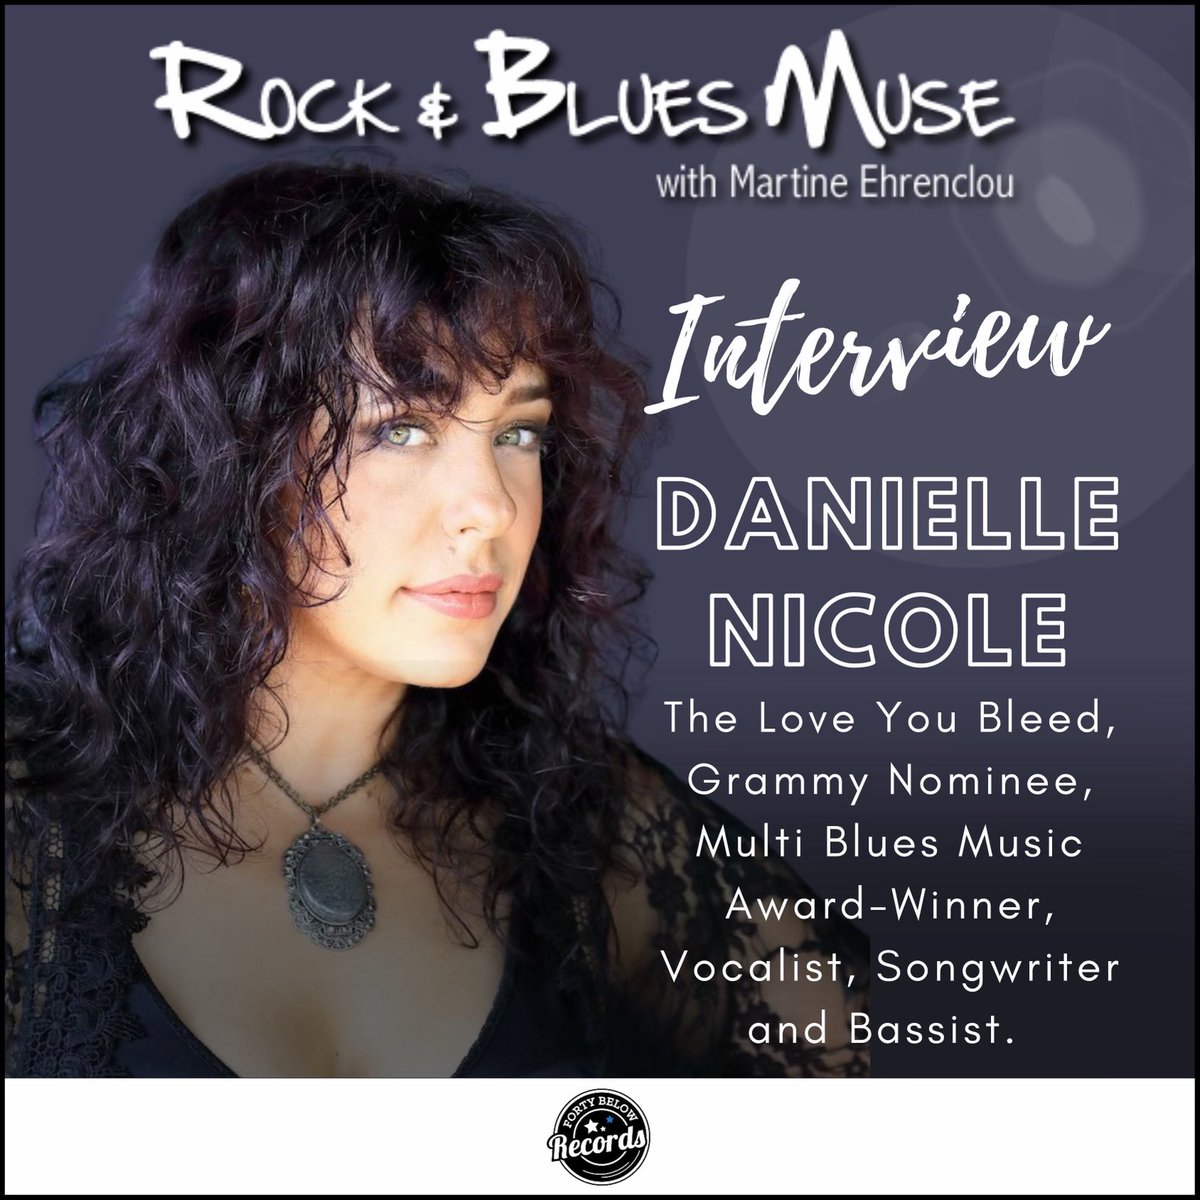 From @RockBluesMuse: Interview: Danielle Nicole, Grammy nominee, five-time Blues Music Award-winner, bassist, vocalist, songwriter. …
📖 rockandbluesmuse.com/2024/02/01/int…